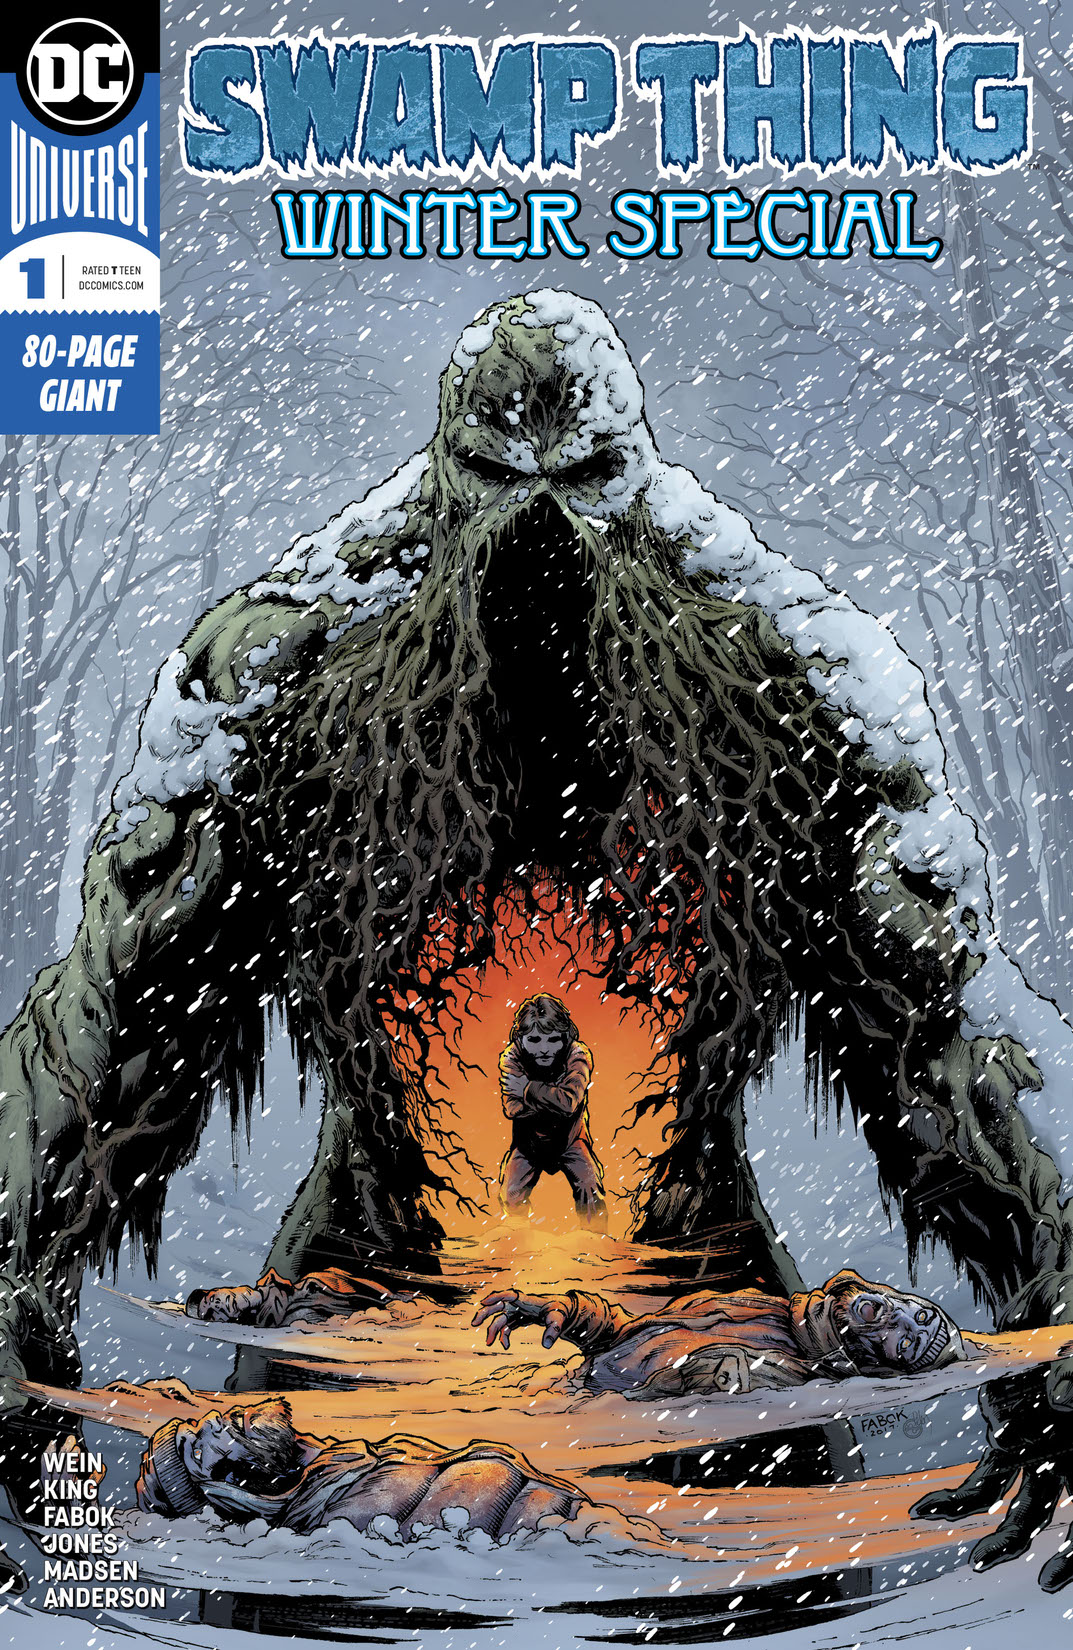 Swamp Thing Winter Special #1 preview images